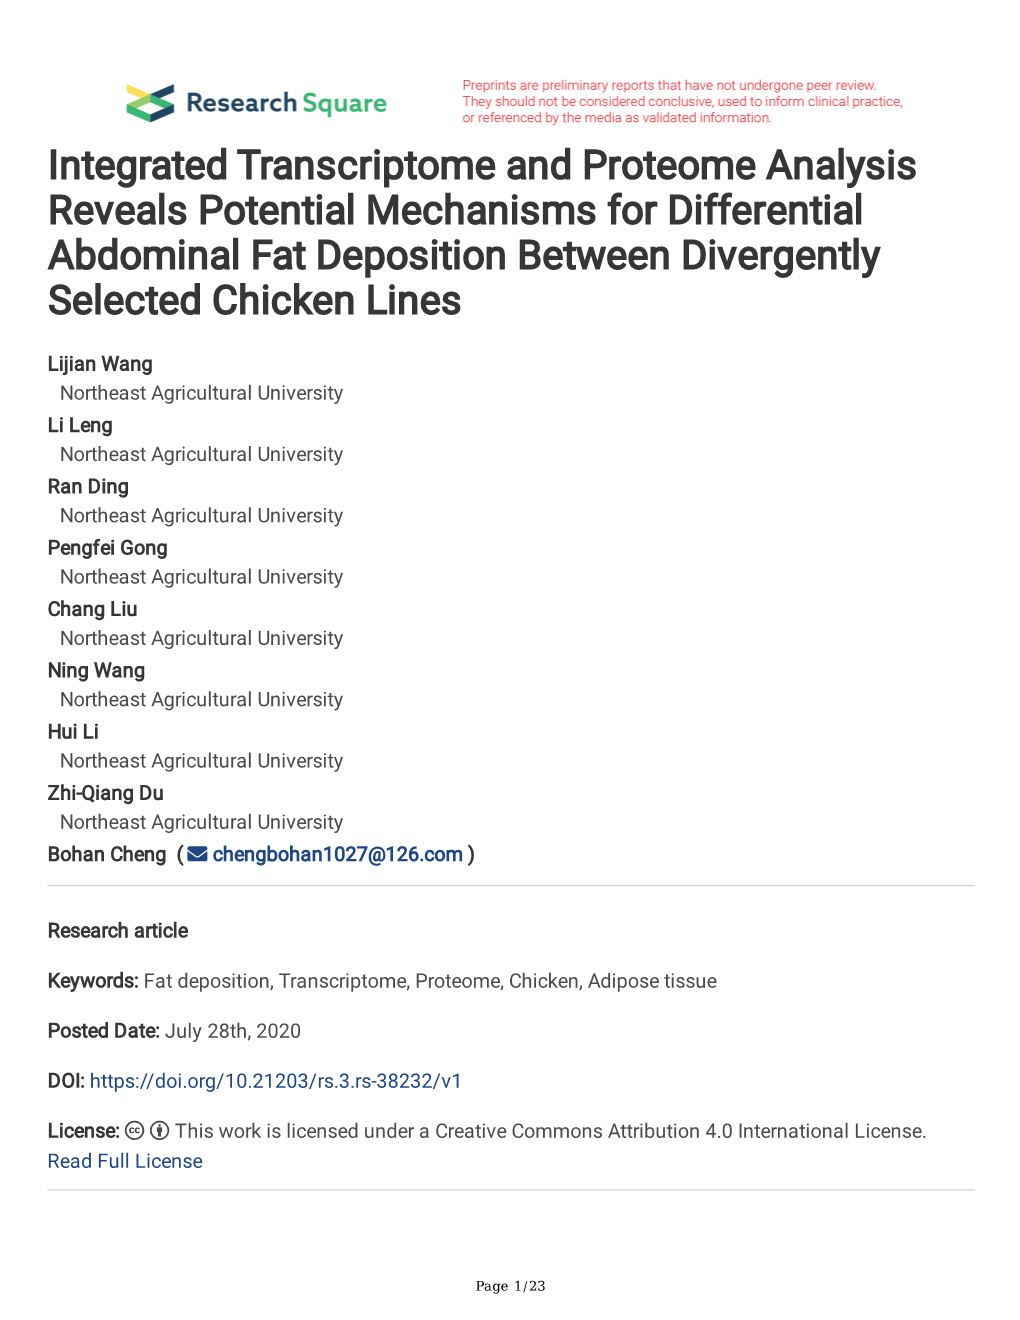 Integrated Transcriptome and Proteome Analysis Reveals Potential Mechanisms for Differential Abdominal Fat Deposition Between Divergently Selected Chicken Lines